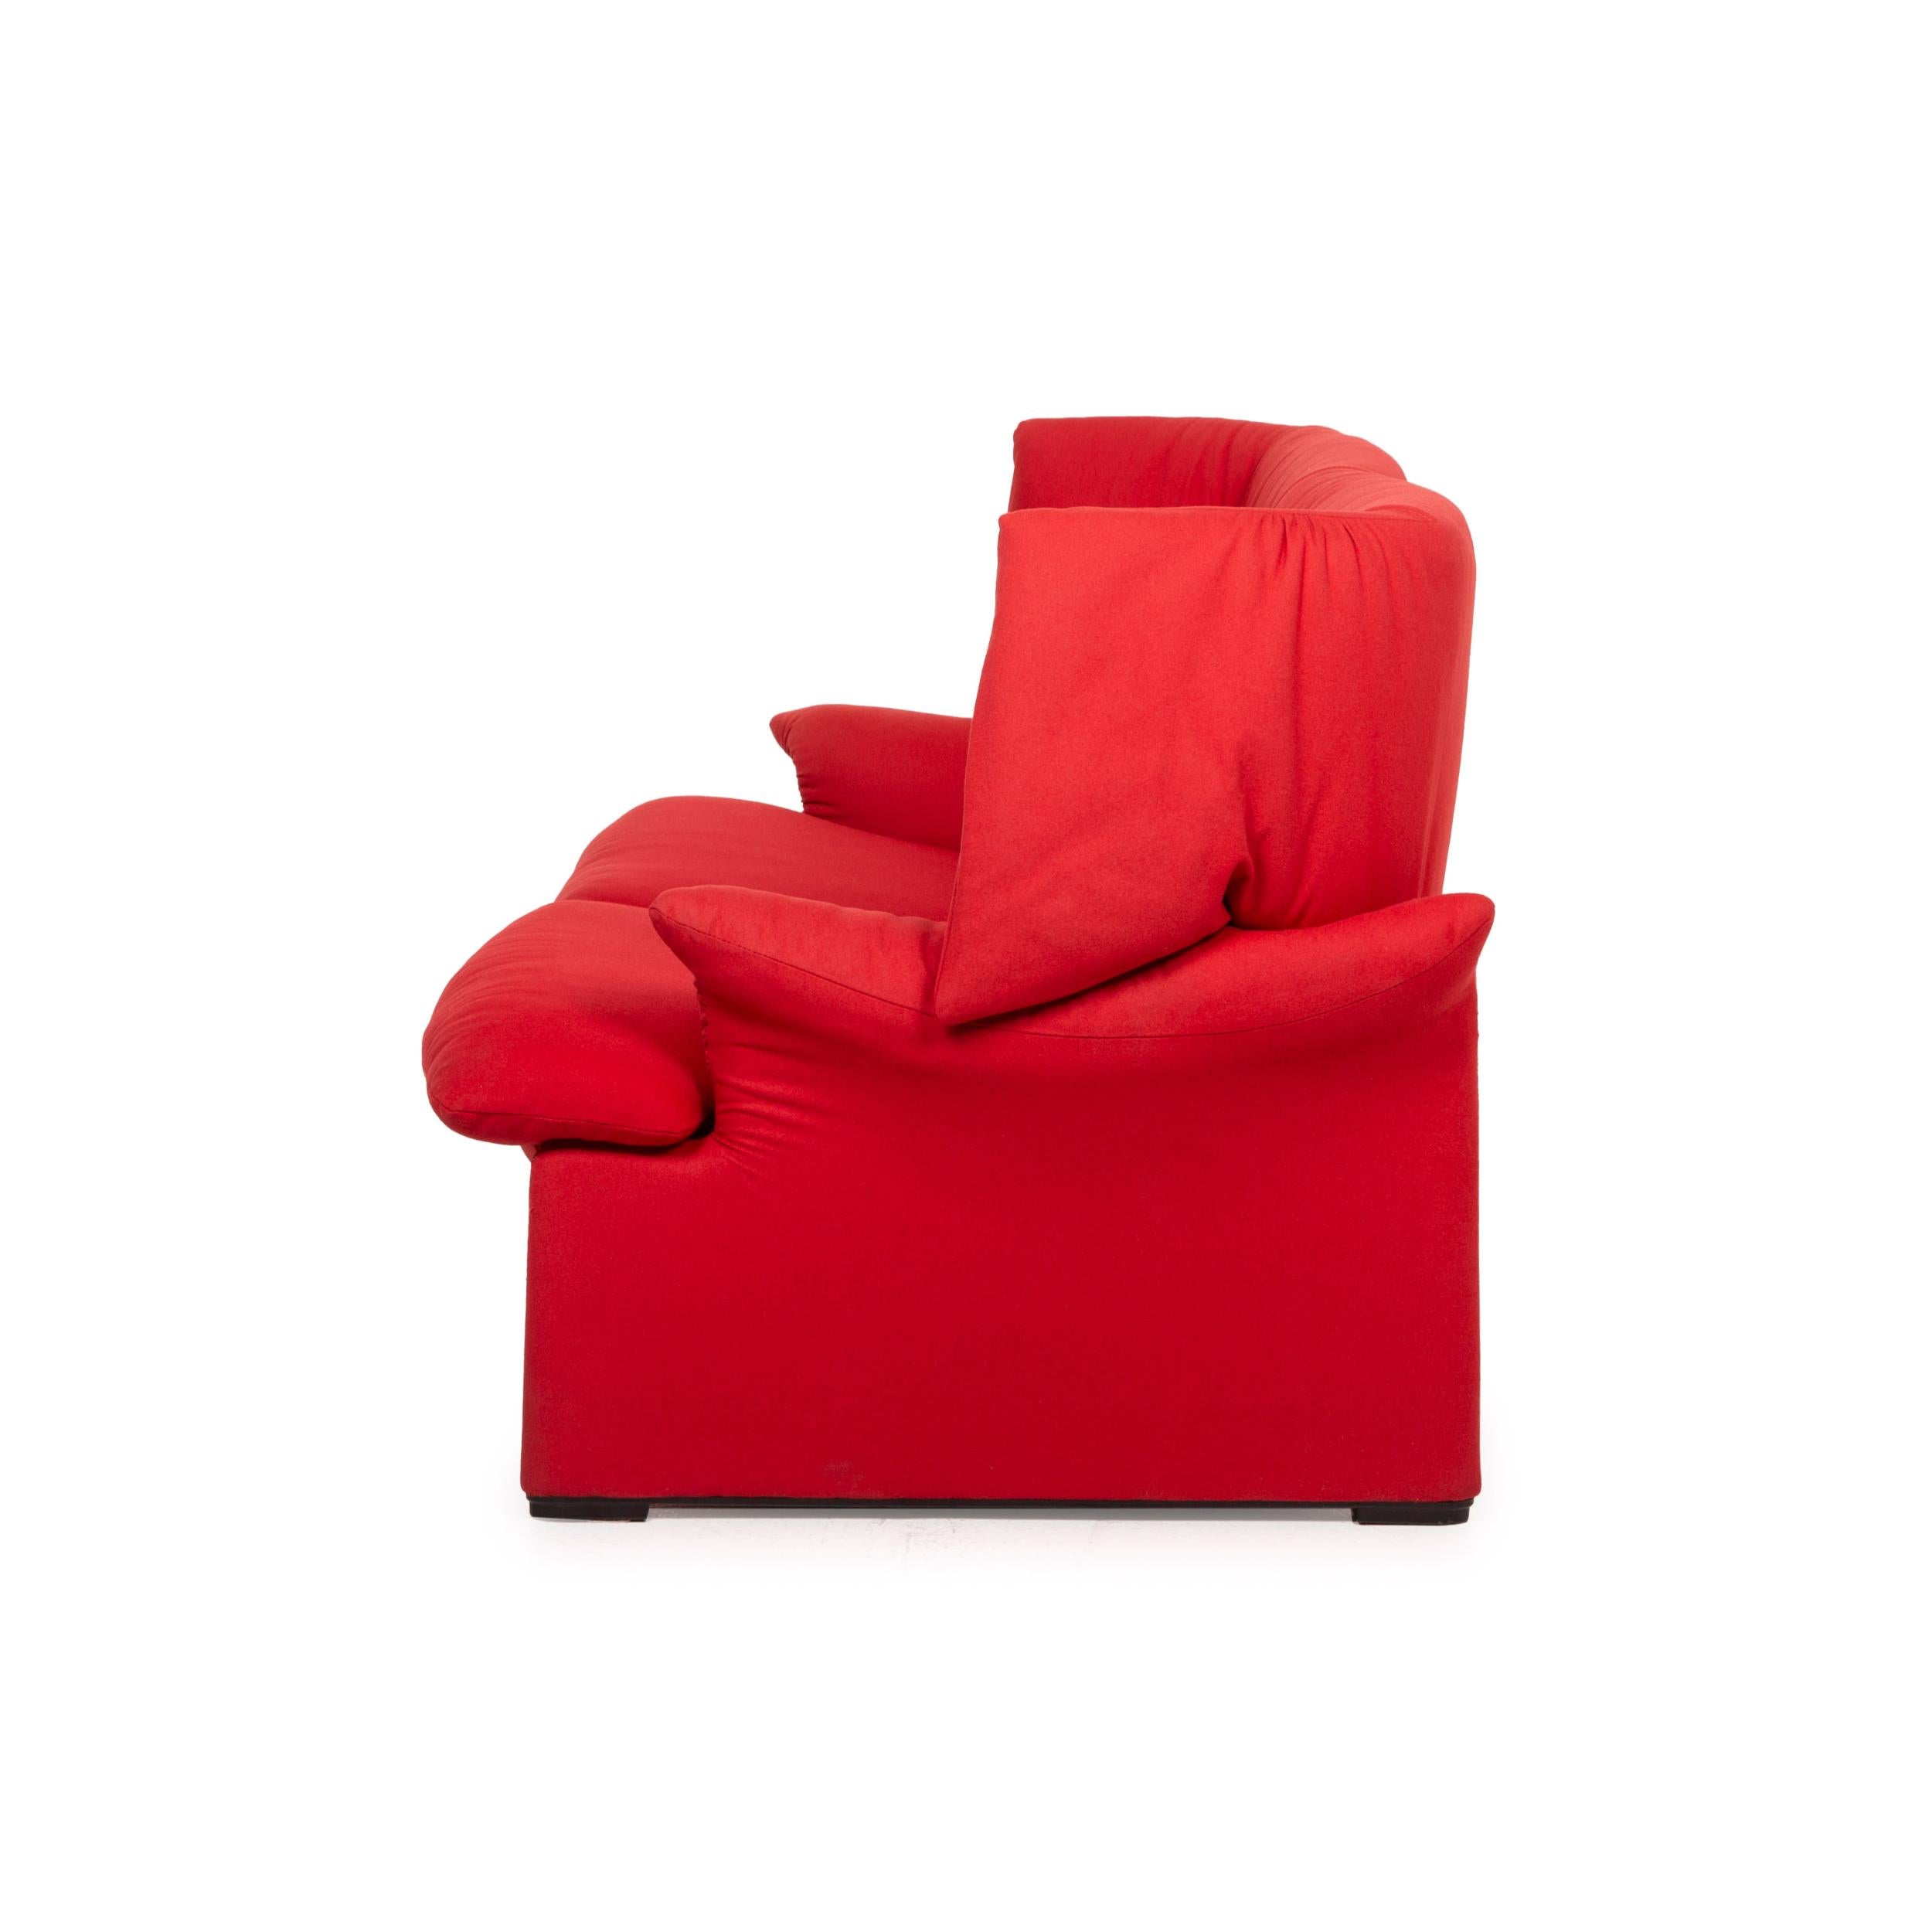 Cassina Maralunga Fabric Sofa Red Two-Seater For Sale 3